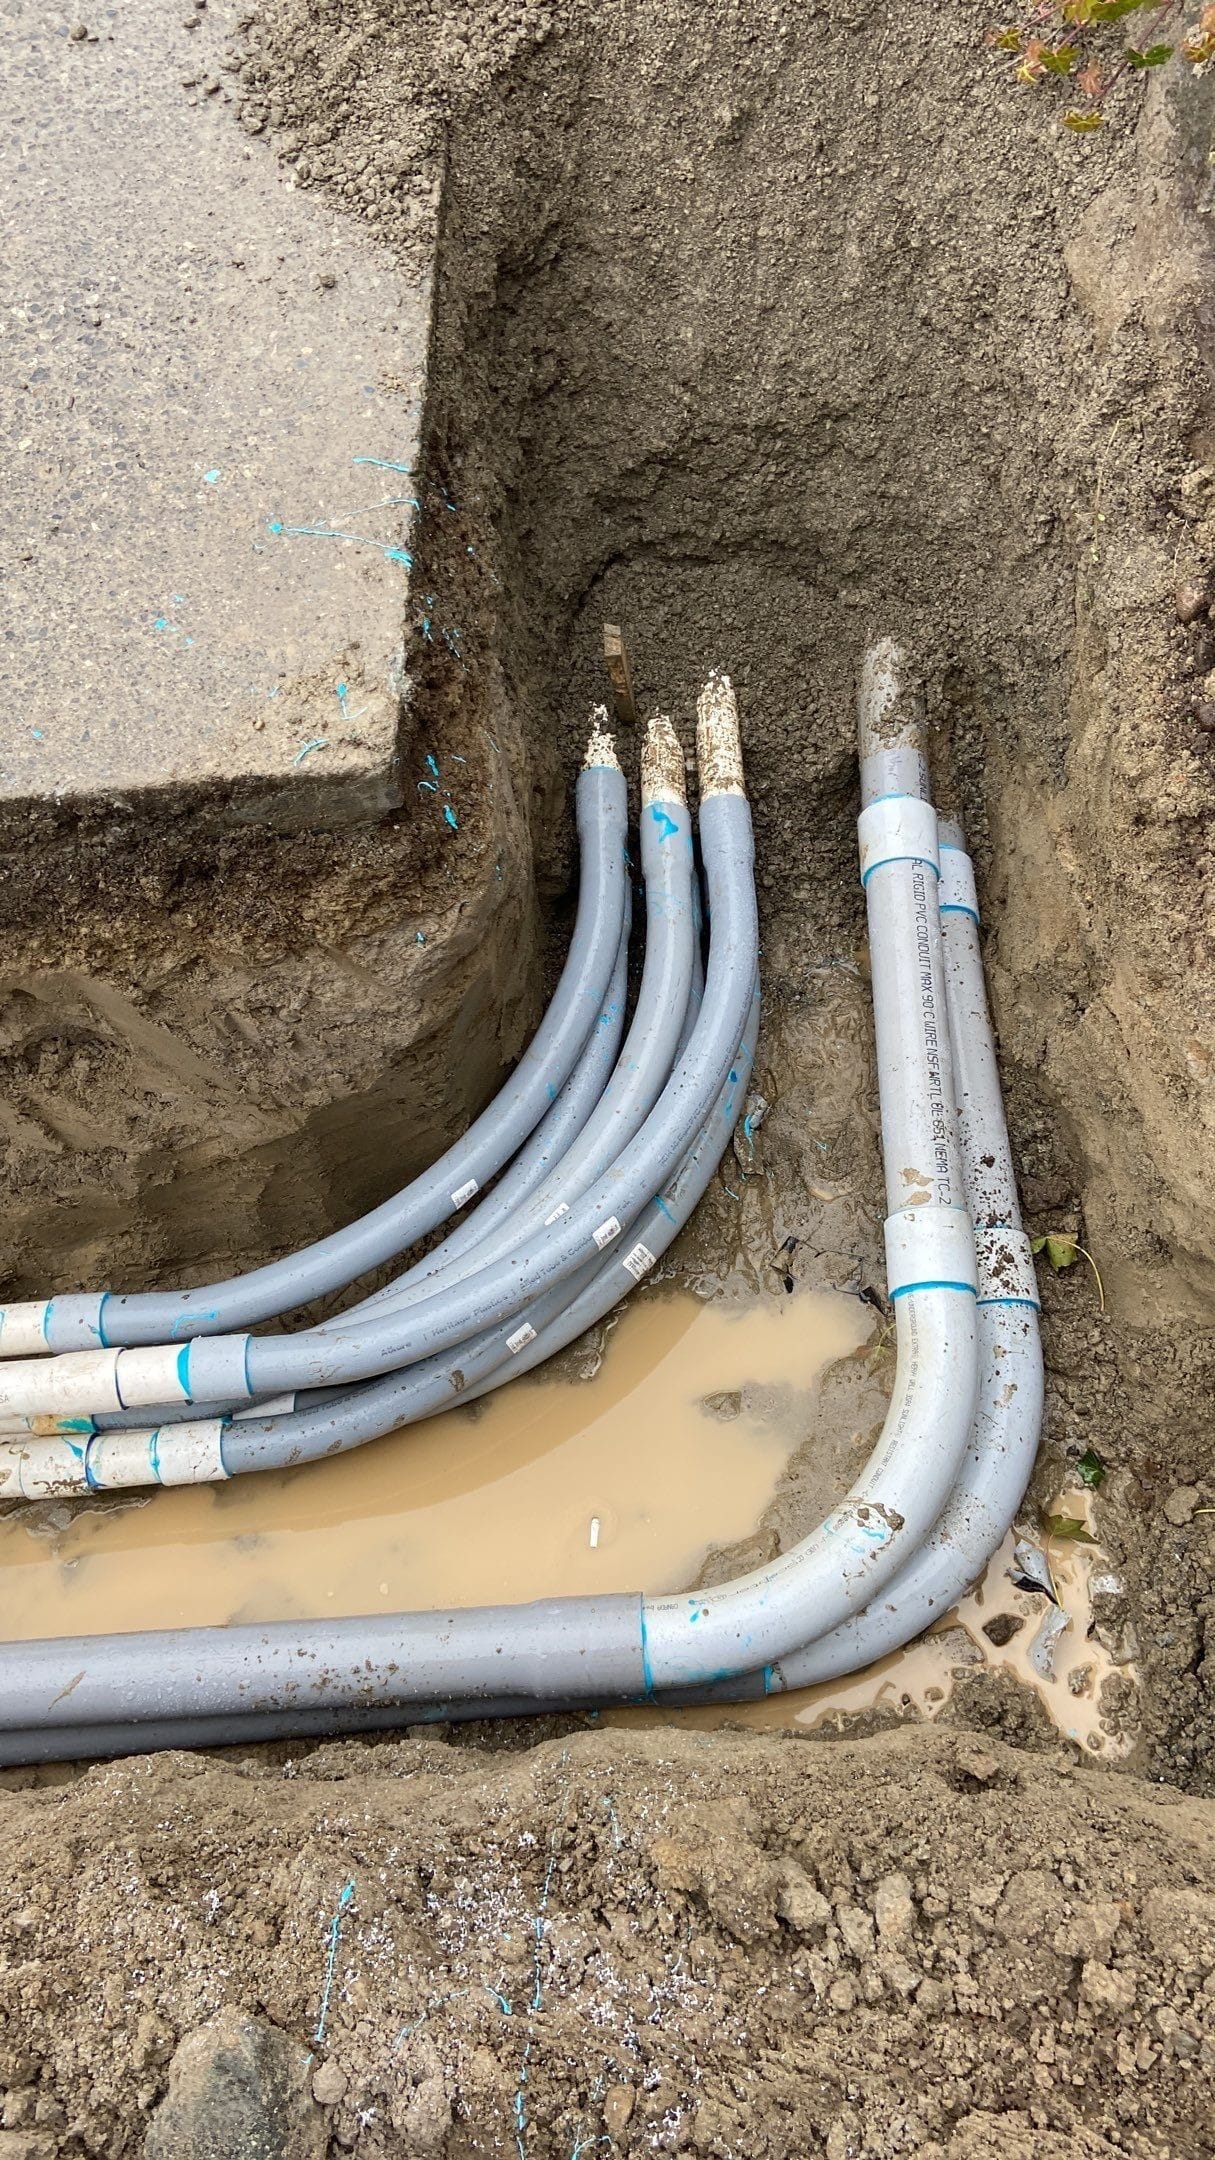 Multiple utility conduits are labeled.